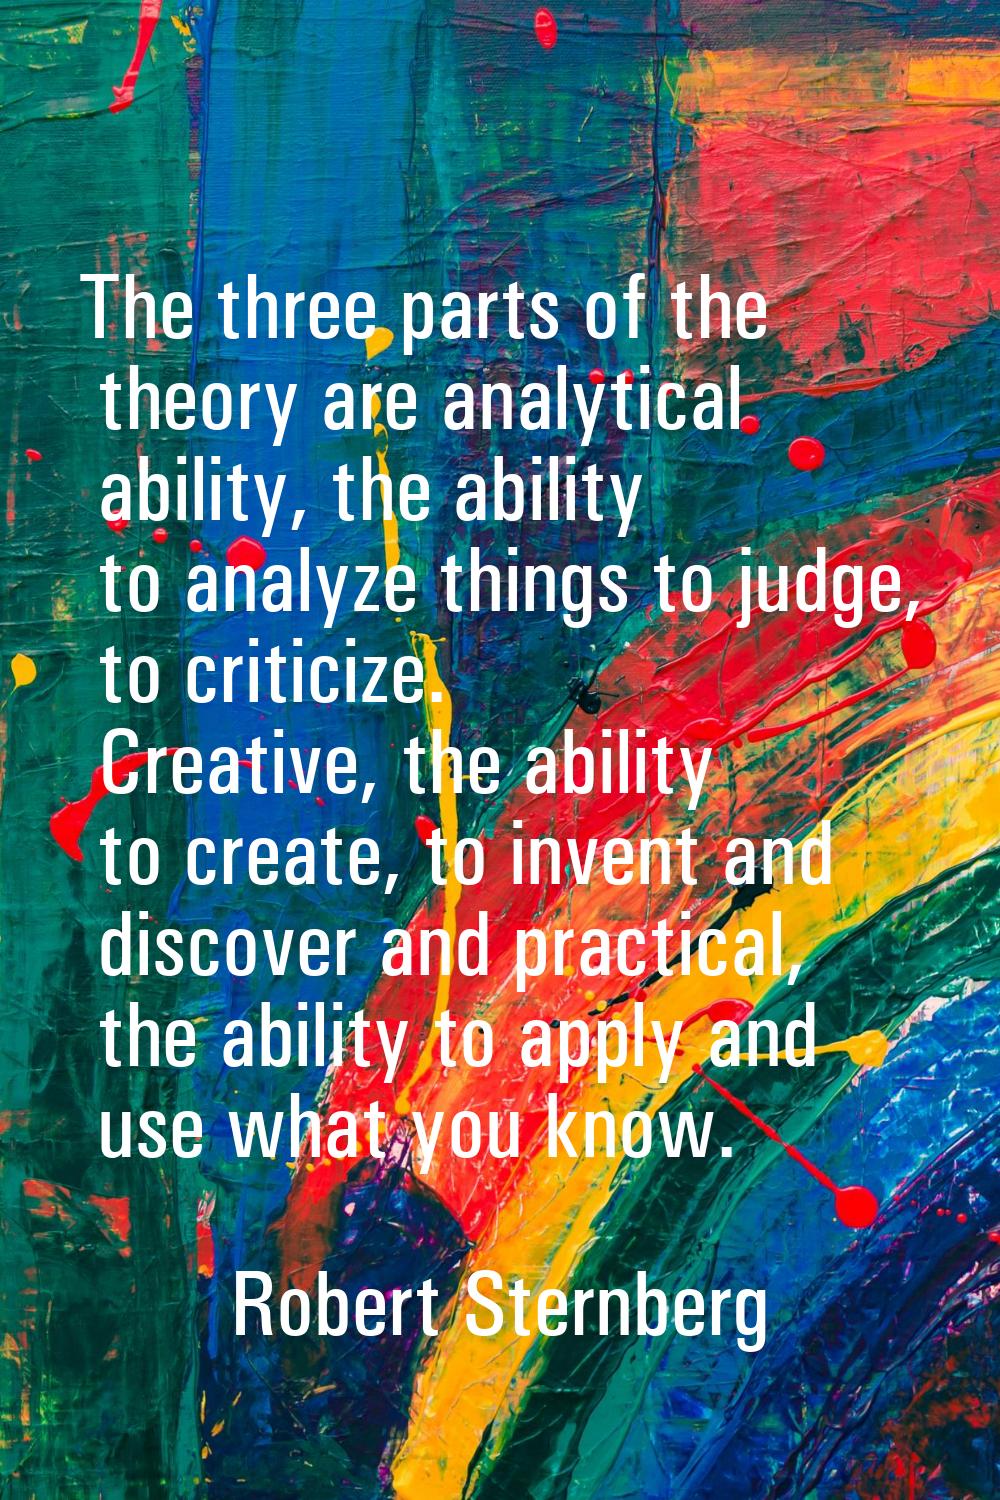 The three parts of the theory are analytical ability, the ability to analyze things to judge, to cr